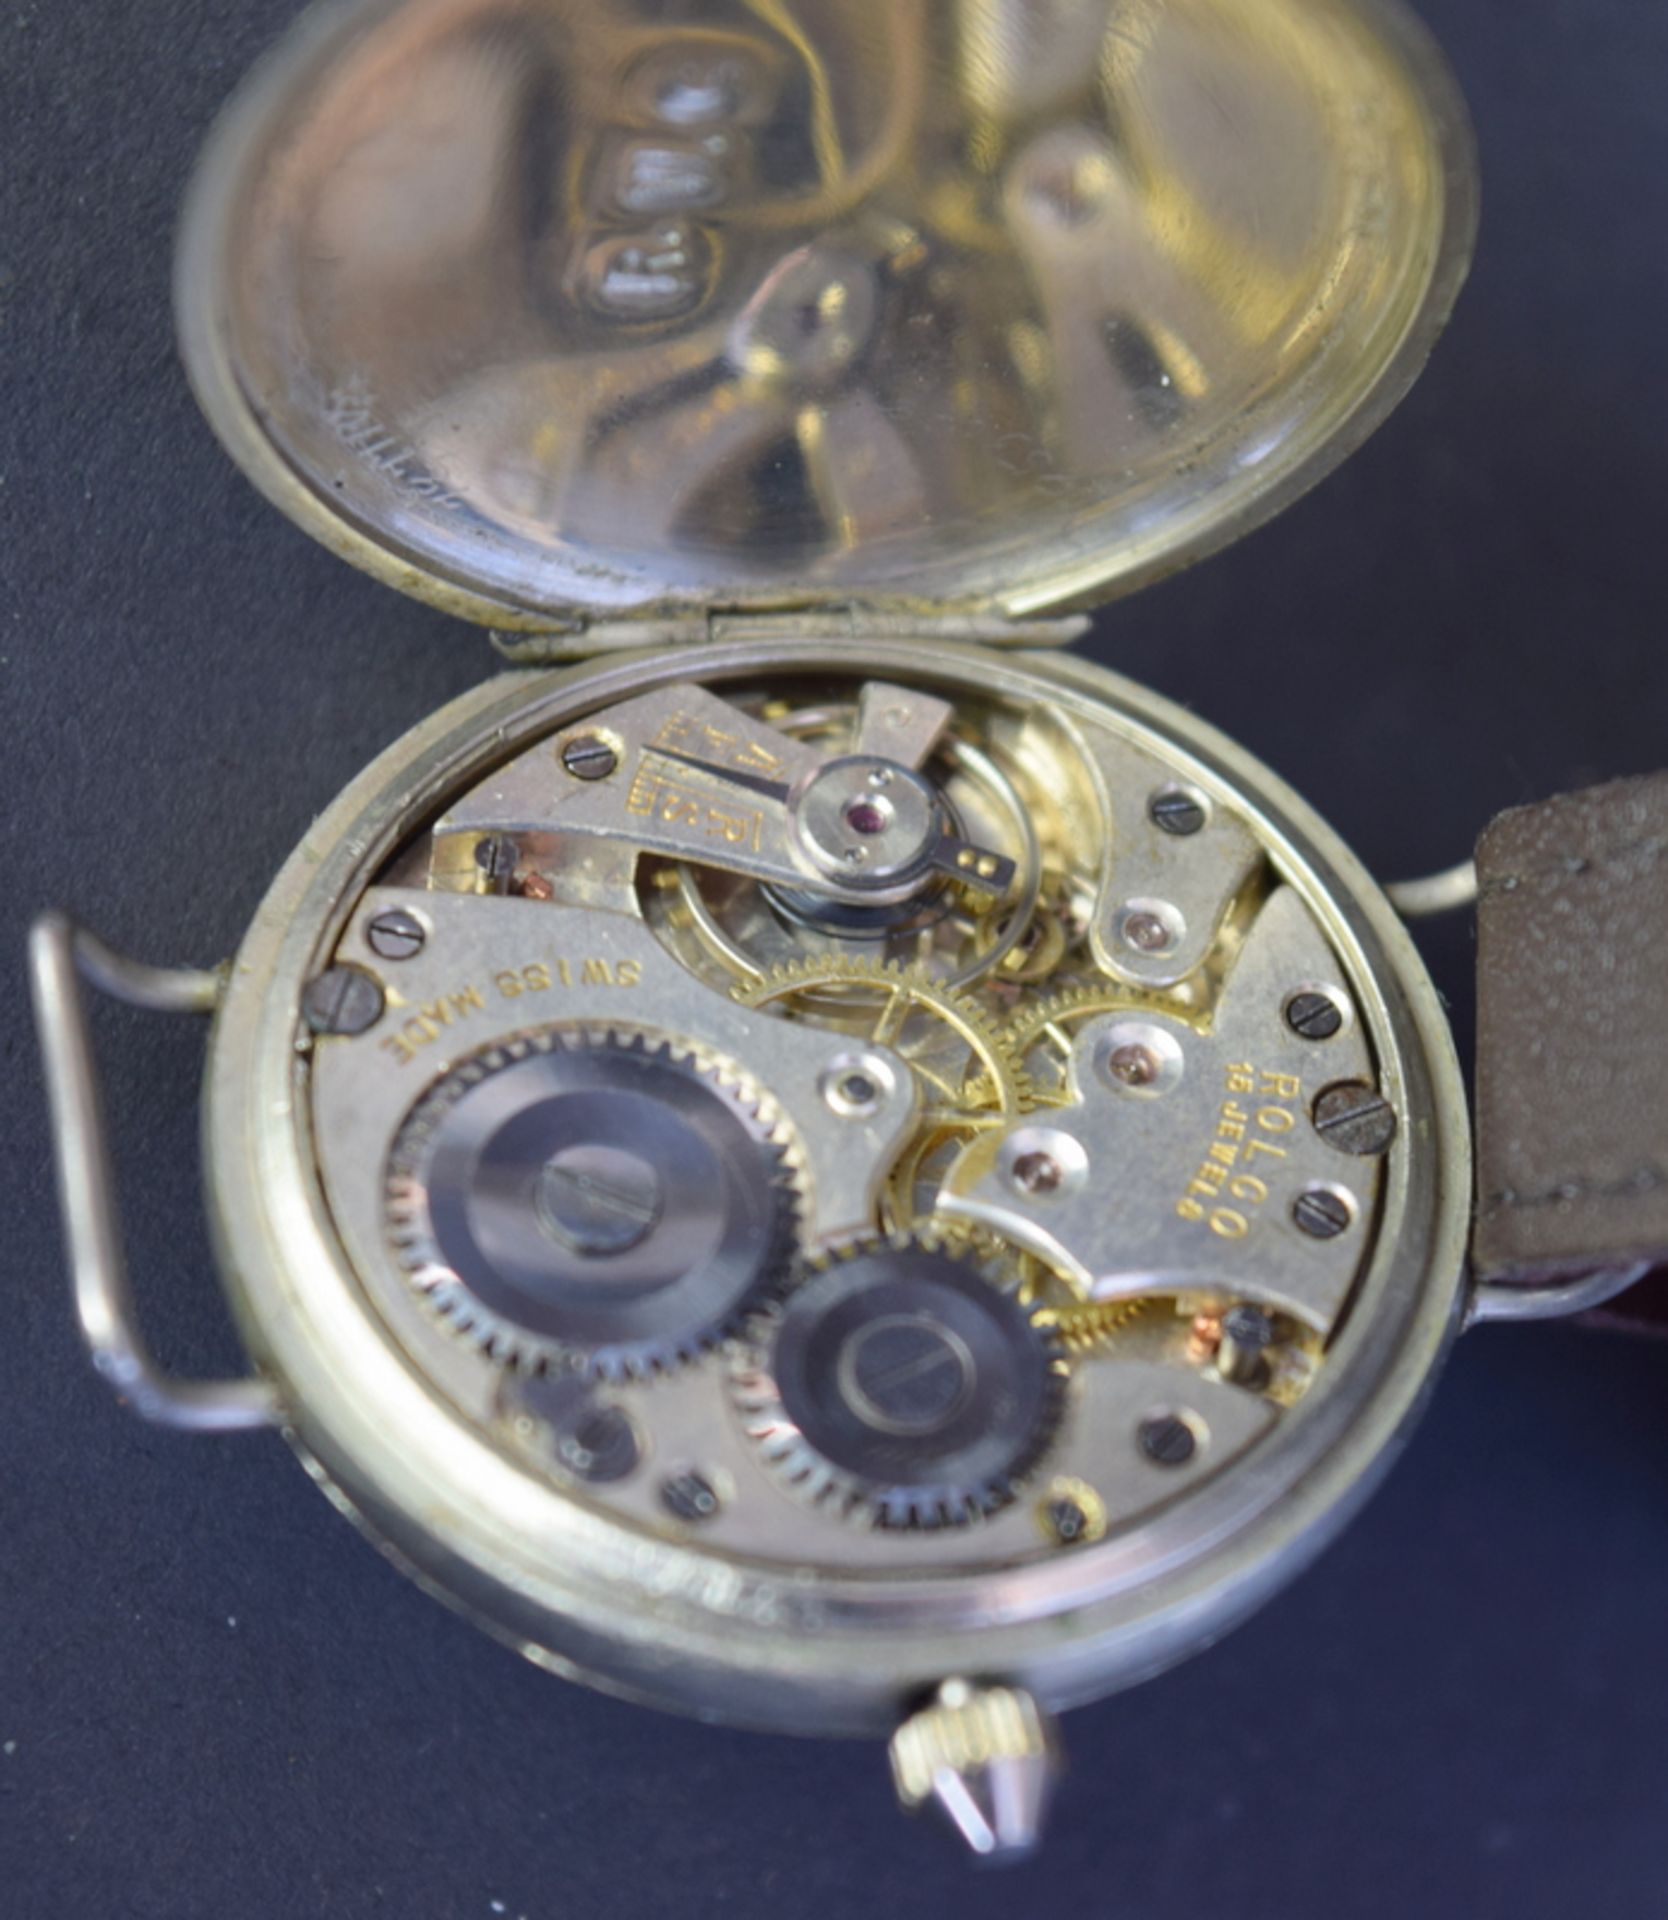 Rolco (Early Rolex) Trench Watch - Image 4 of 6